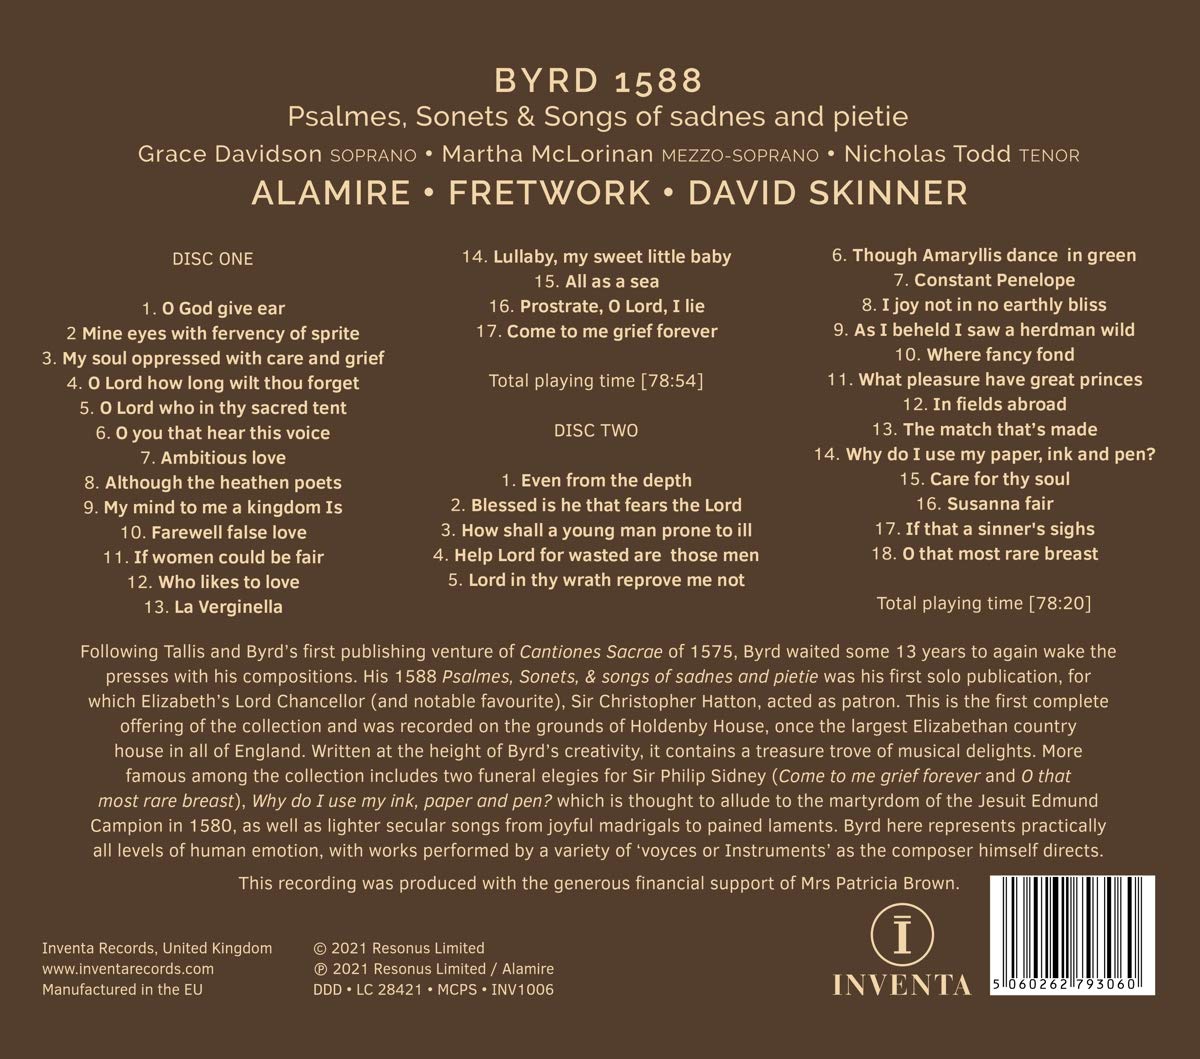 Tonight's music:
#WilliamByrd
Psalmes sonets and songs of sadness and pietie 
@FretworkViols 
@Alamire 
#RenaissanceMusic